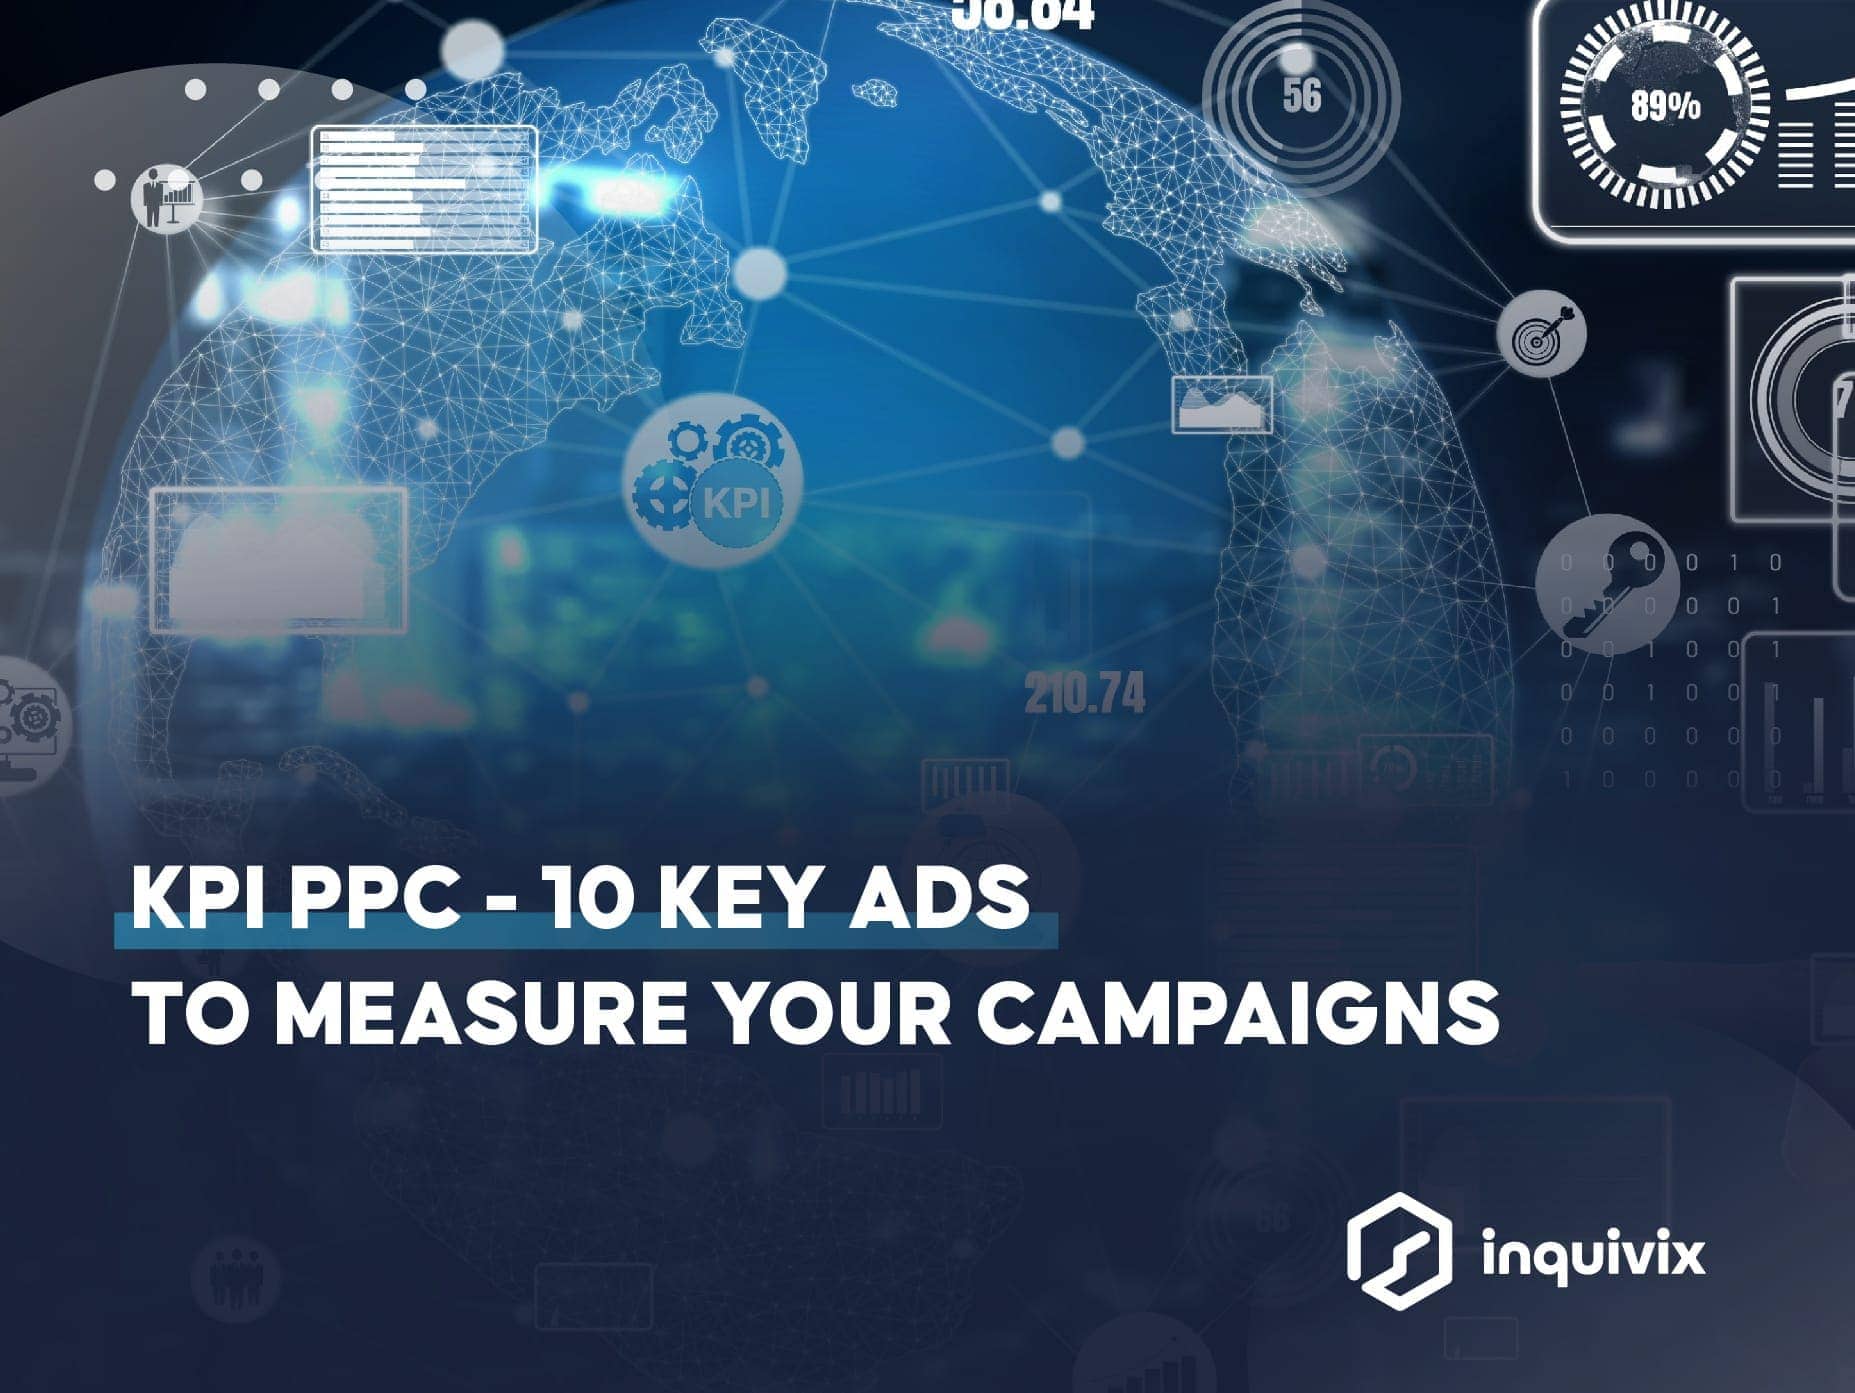 kpi ppc 10 key ads to measure your campaigns